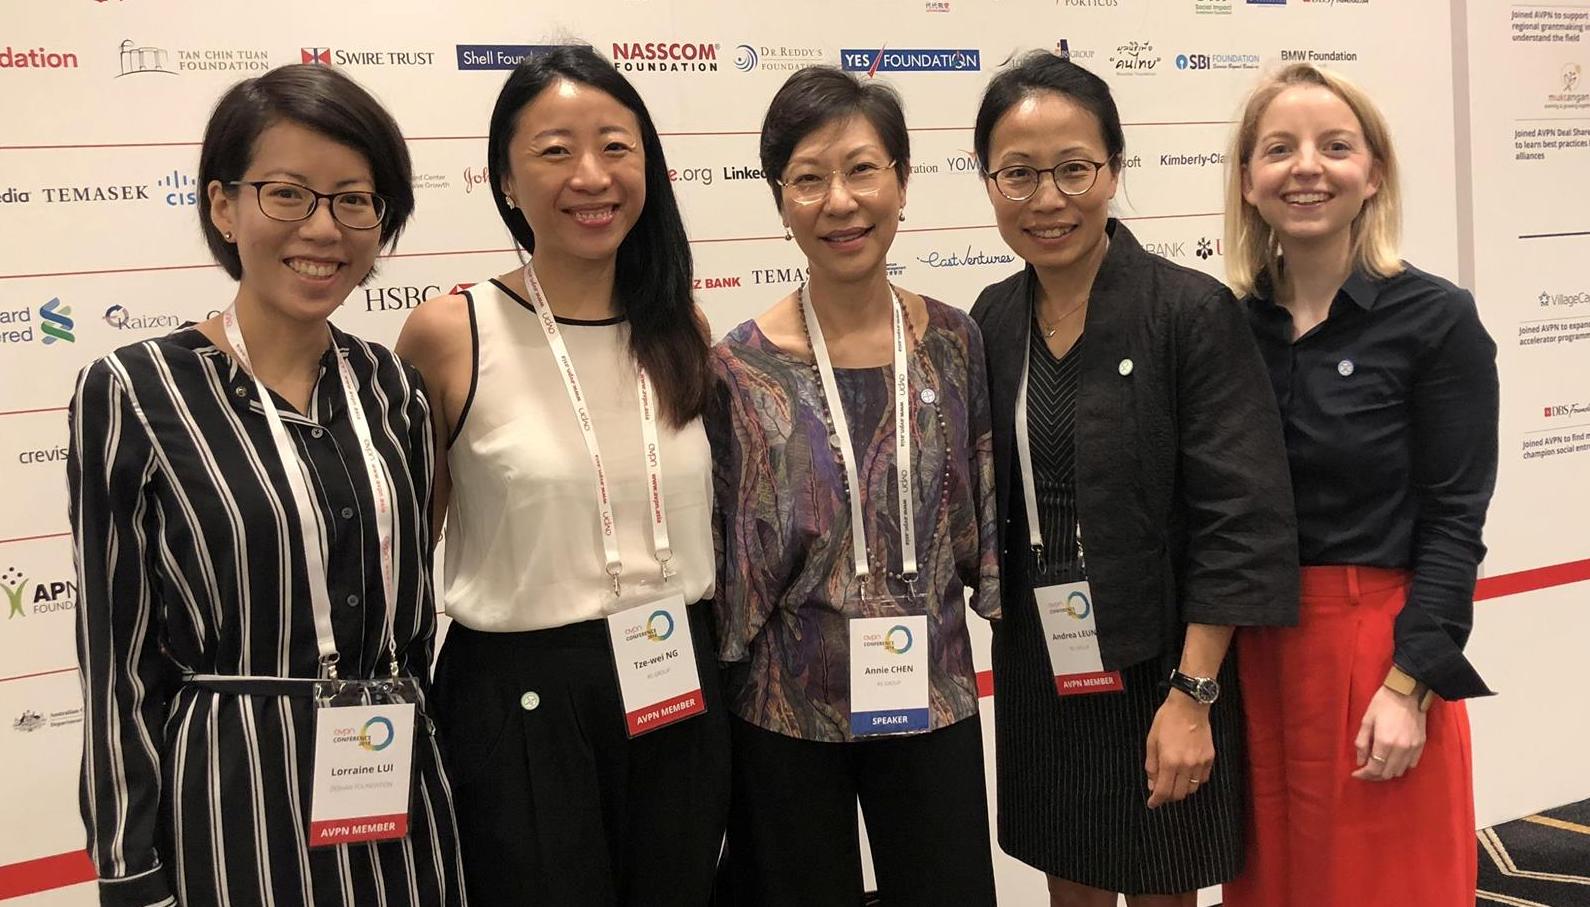 Annie Chen with her colleagues at the AVPN Annual Conference 2018. Photo credit: RS Group